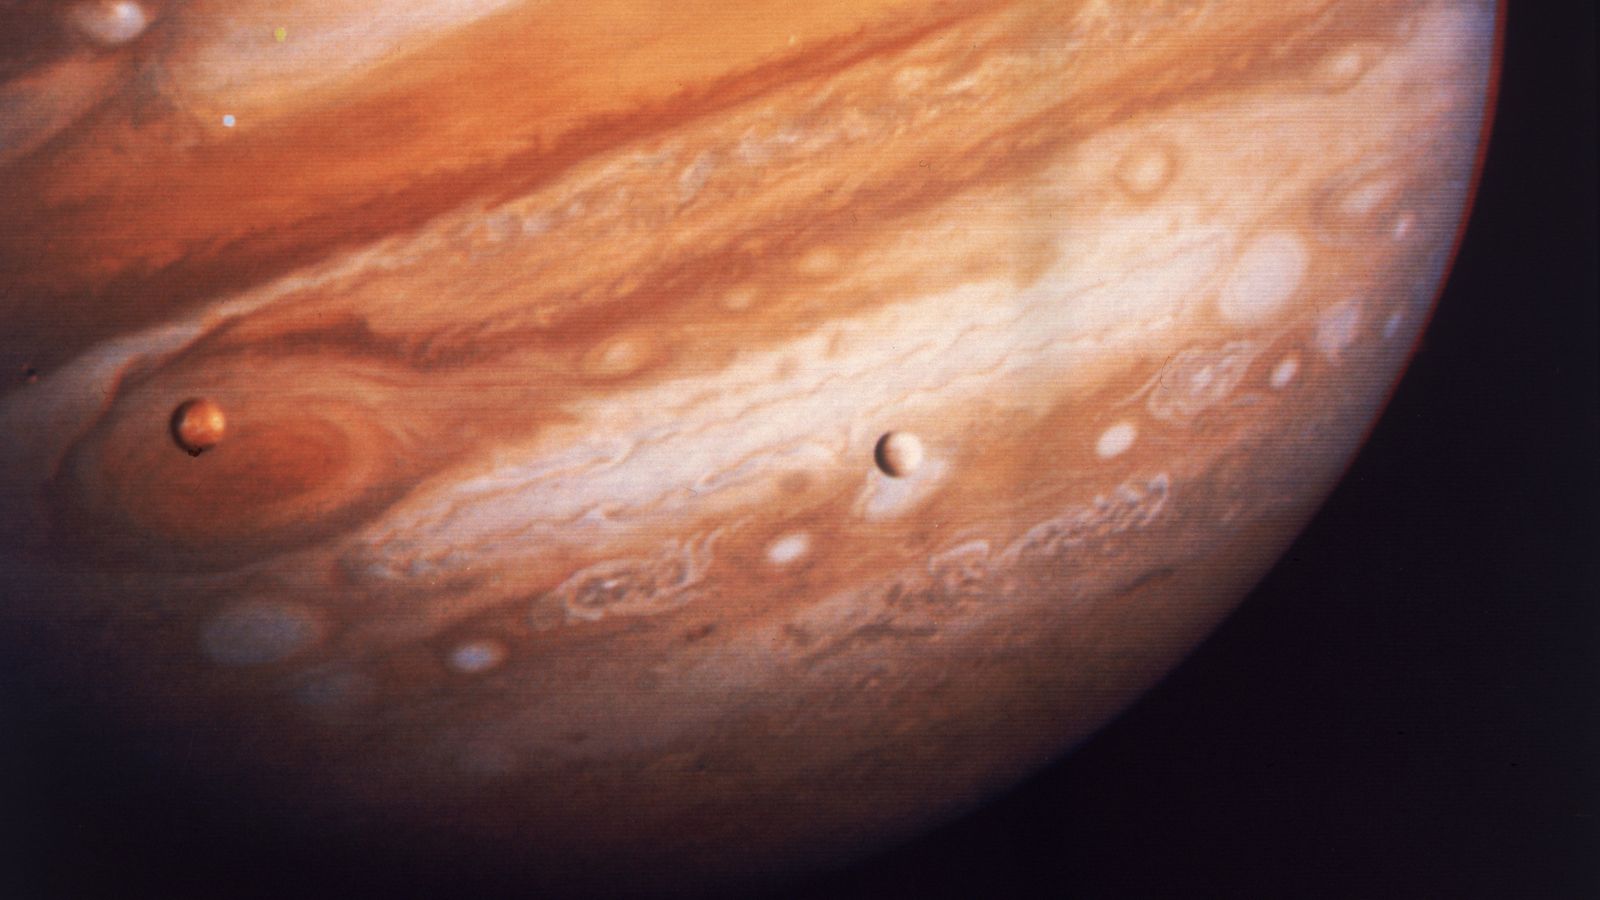 Water conditions in Jupiter’s clouds could support life, says new study